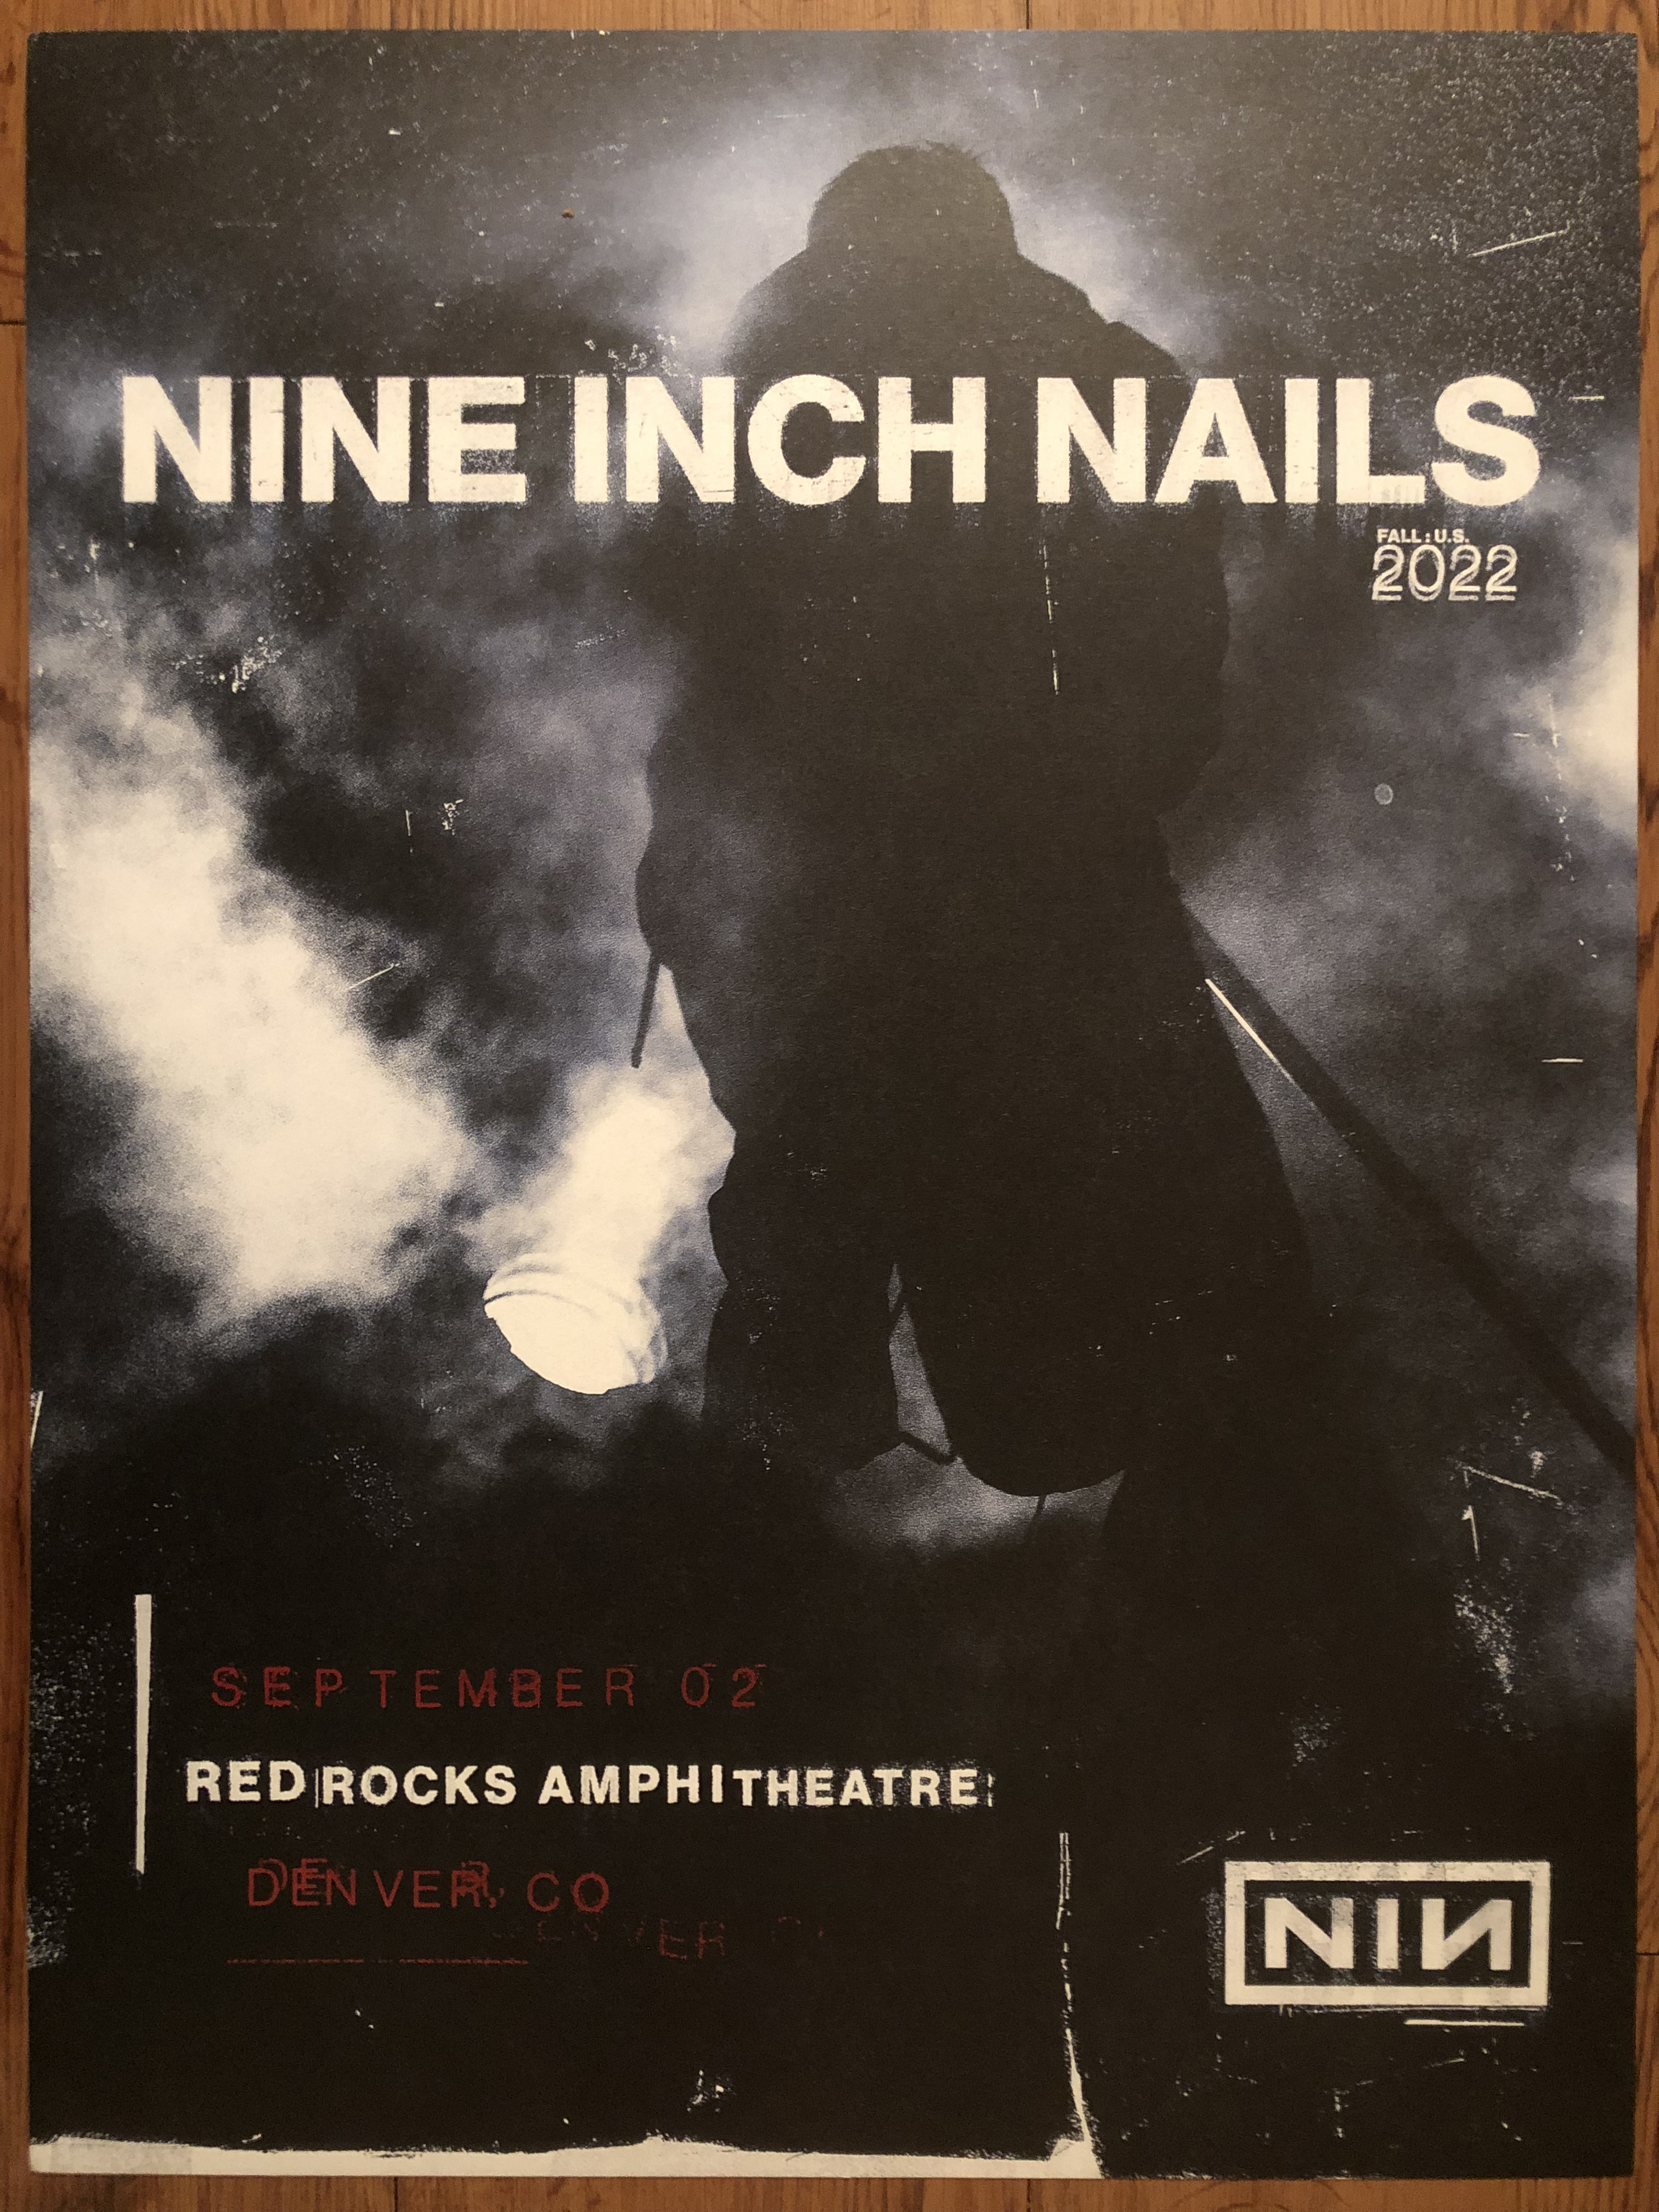 <a href='https://www.ebay.com/sch/i.html?_from=R40&_trksid=p2323012.m570.l1313&_nkw=Nine+Inch+Nails+Poster+Morrison&_sacat=0&mkcid=1&mkrid=711-53200-19255-0&siteid=0&campid=5336302525&customid=poster&toolid=10001&mkevt=1'>Buy this Poster!</a>